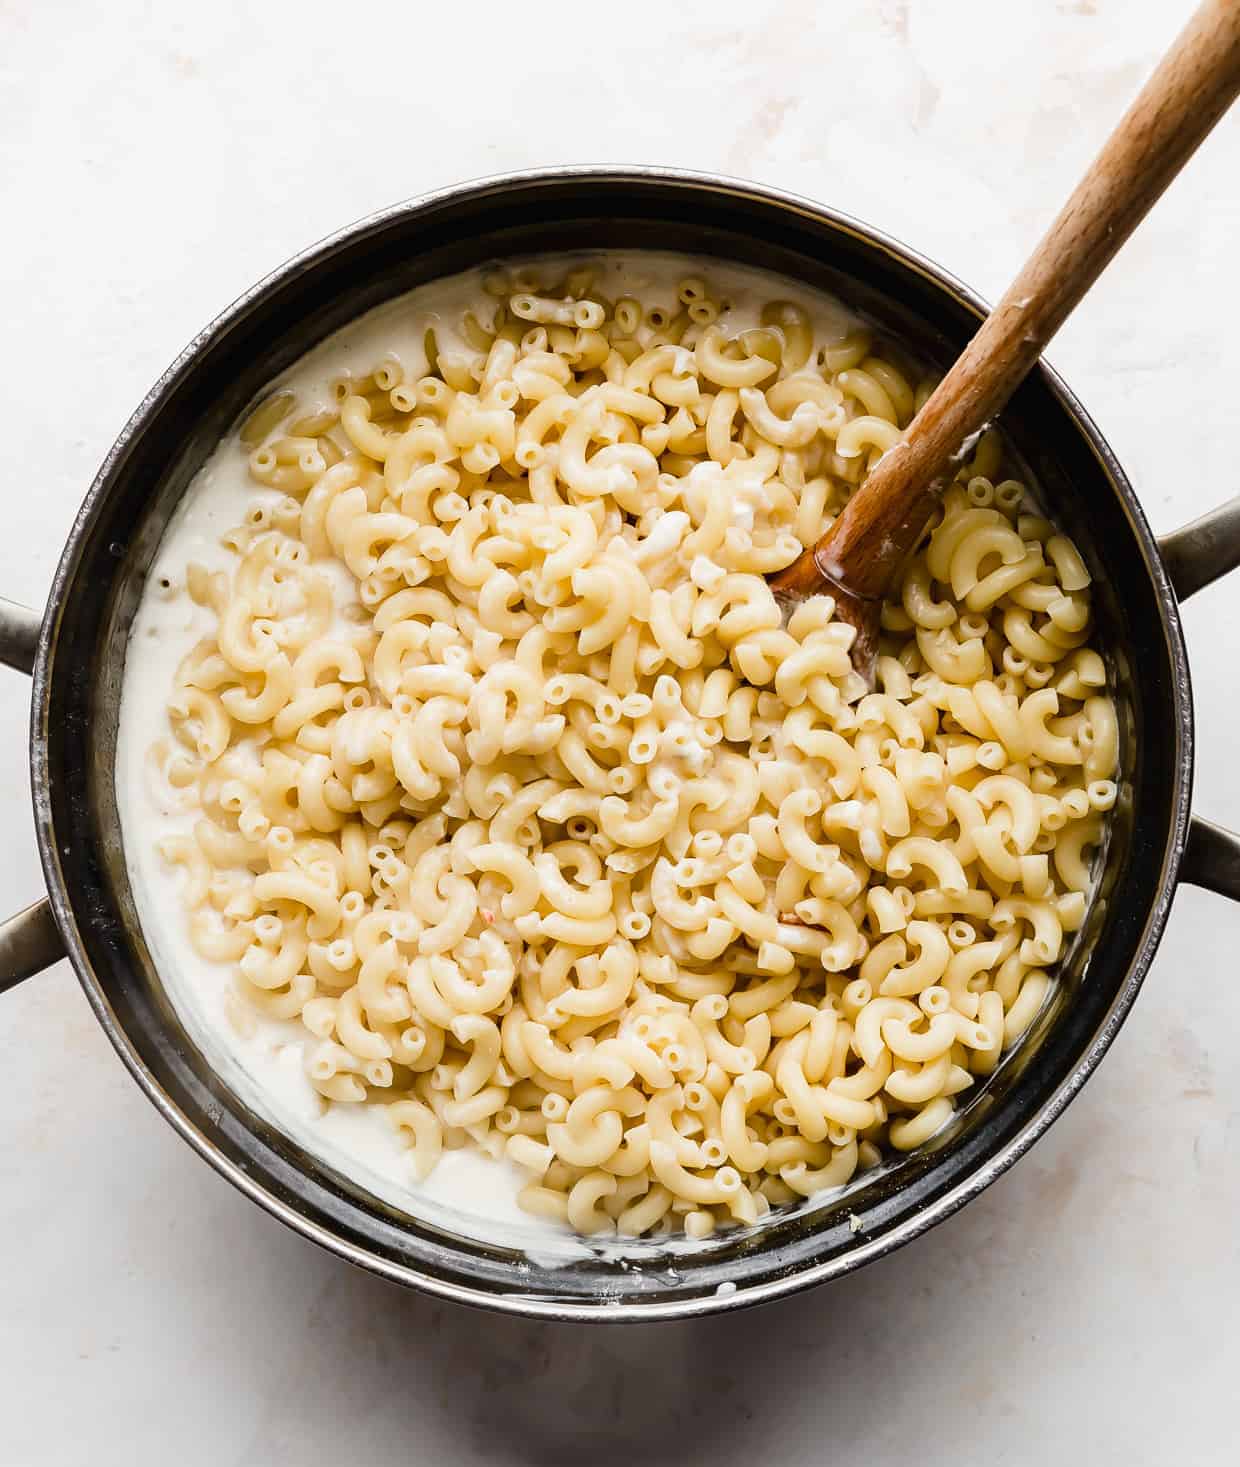 Cooked macaroni noodles in a large pot.